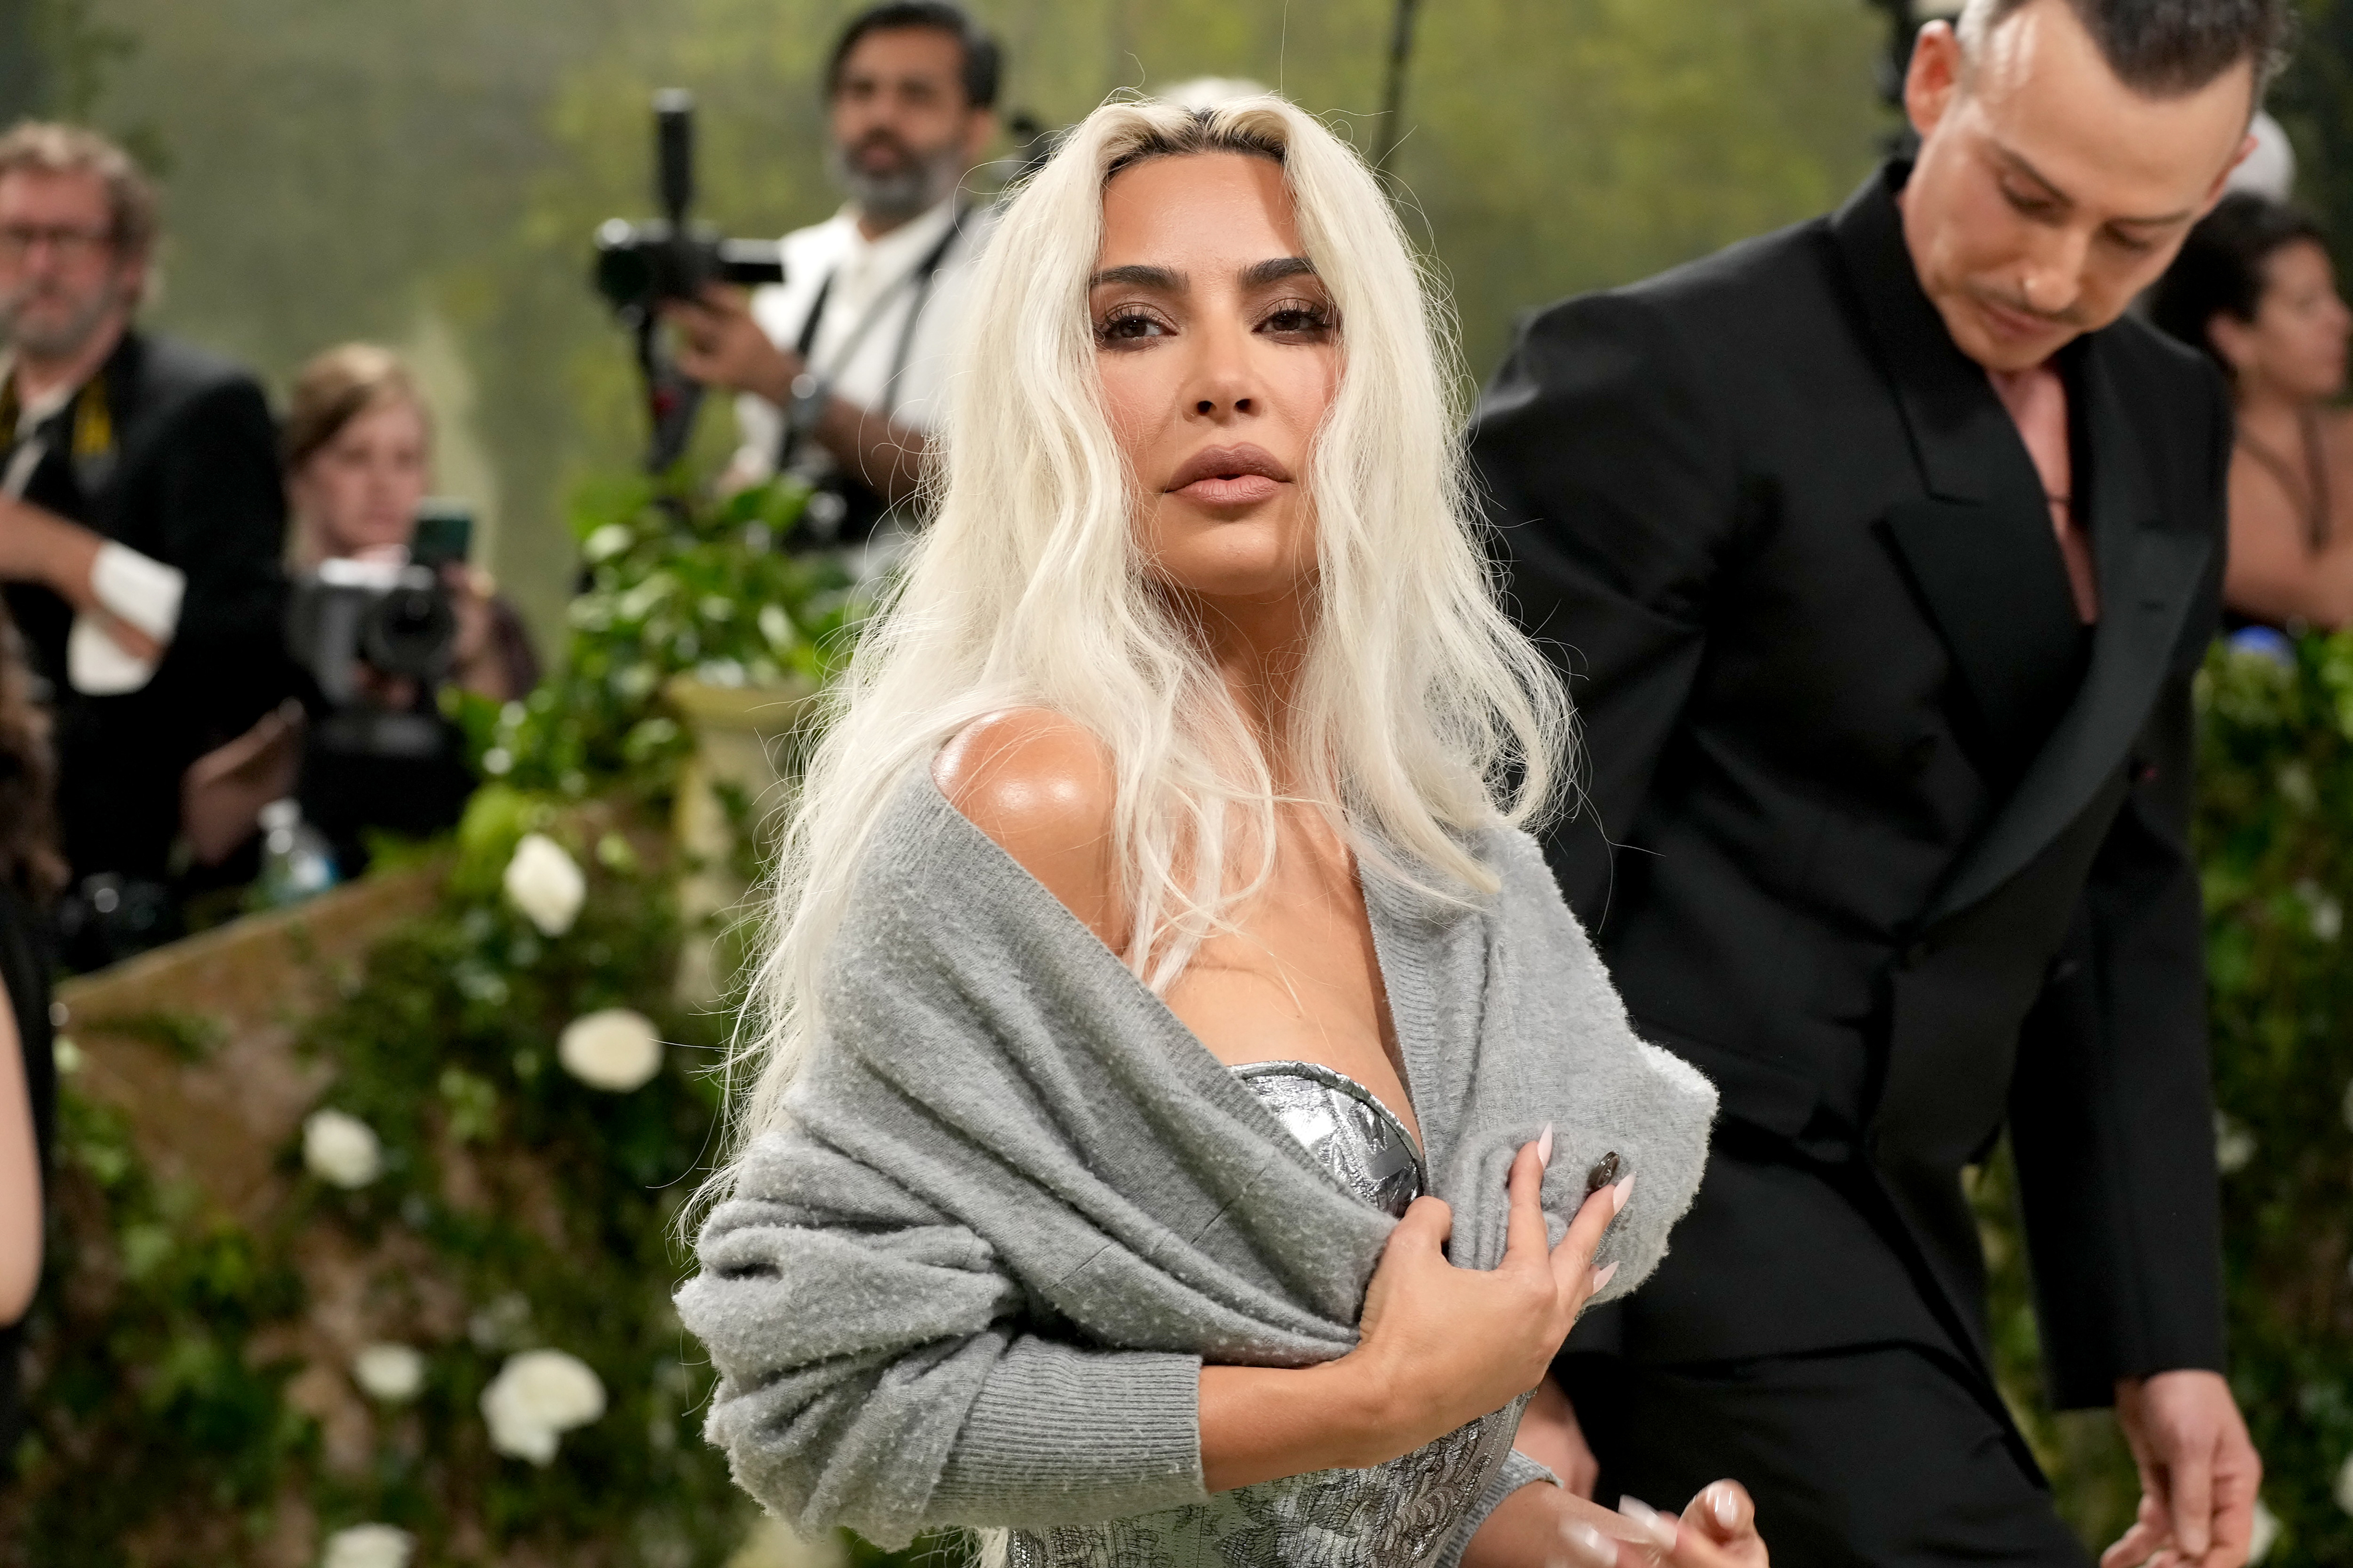 Kim Kardashian in a metallic dress with draped shawl on her arms at an event